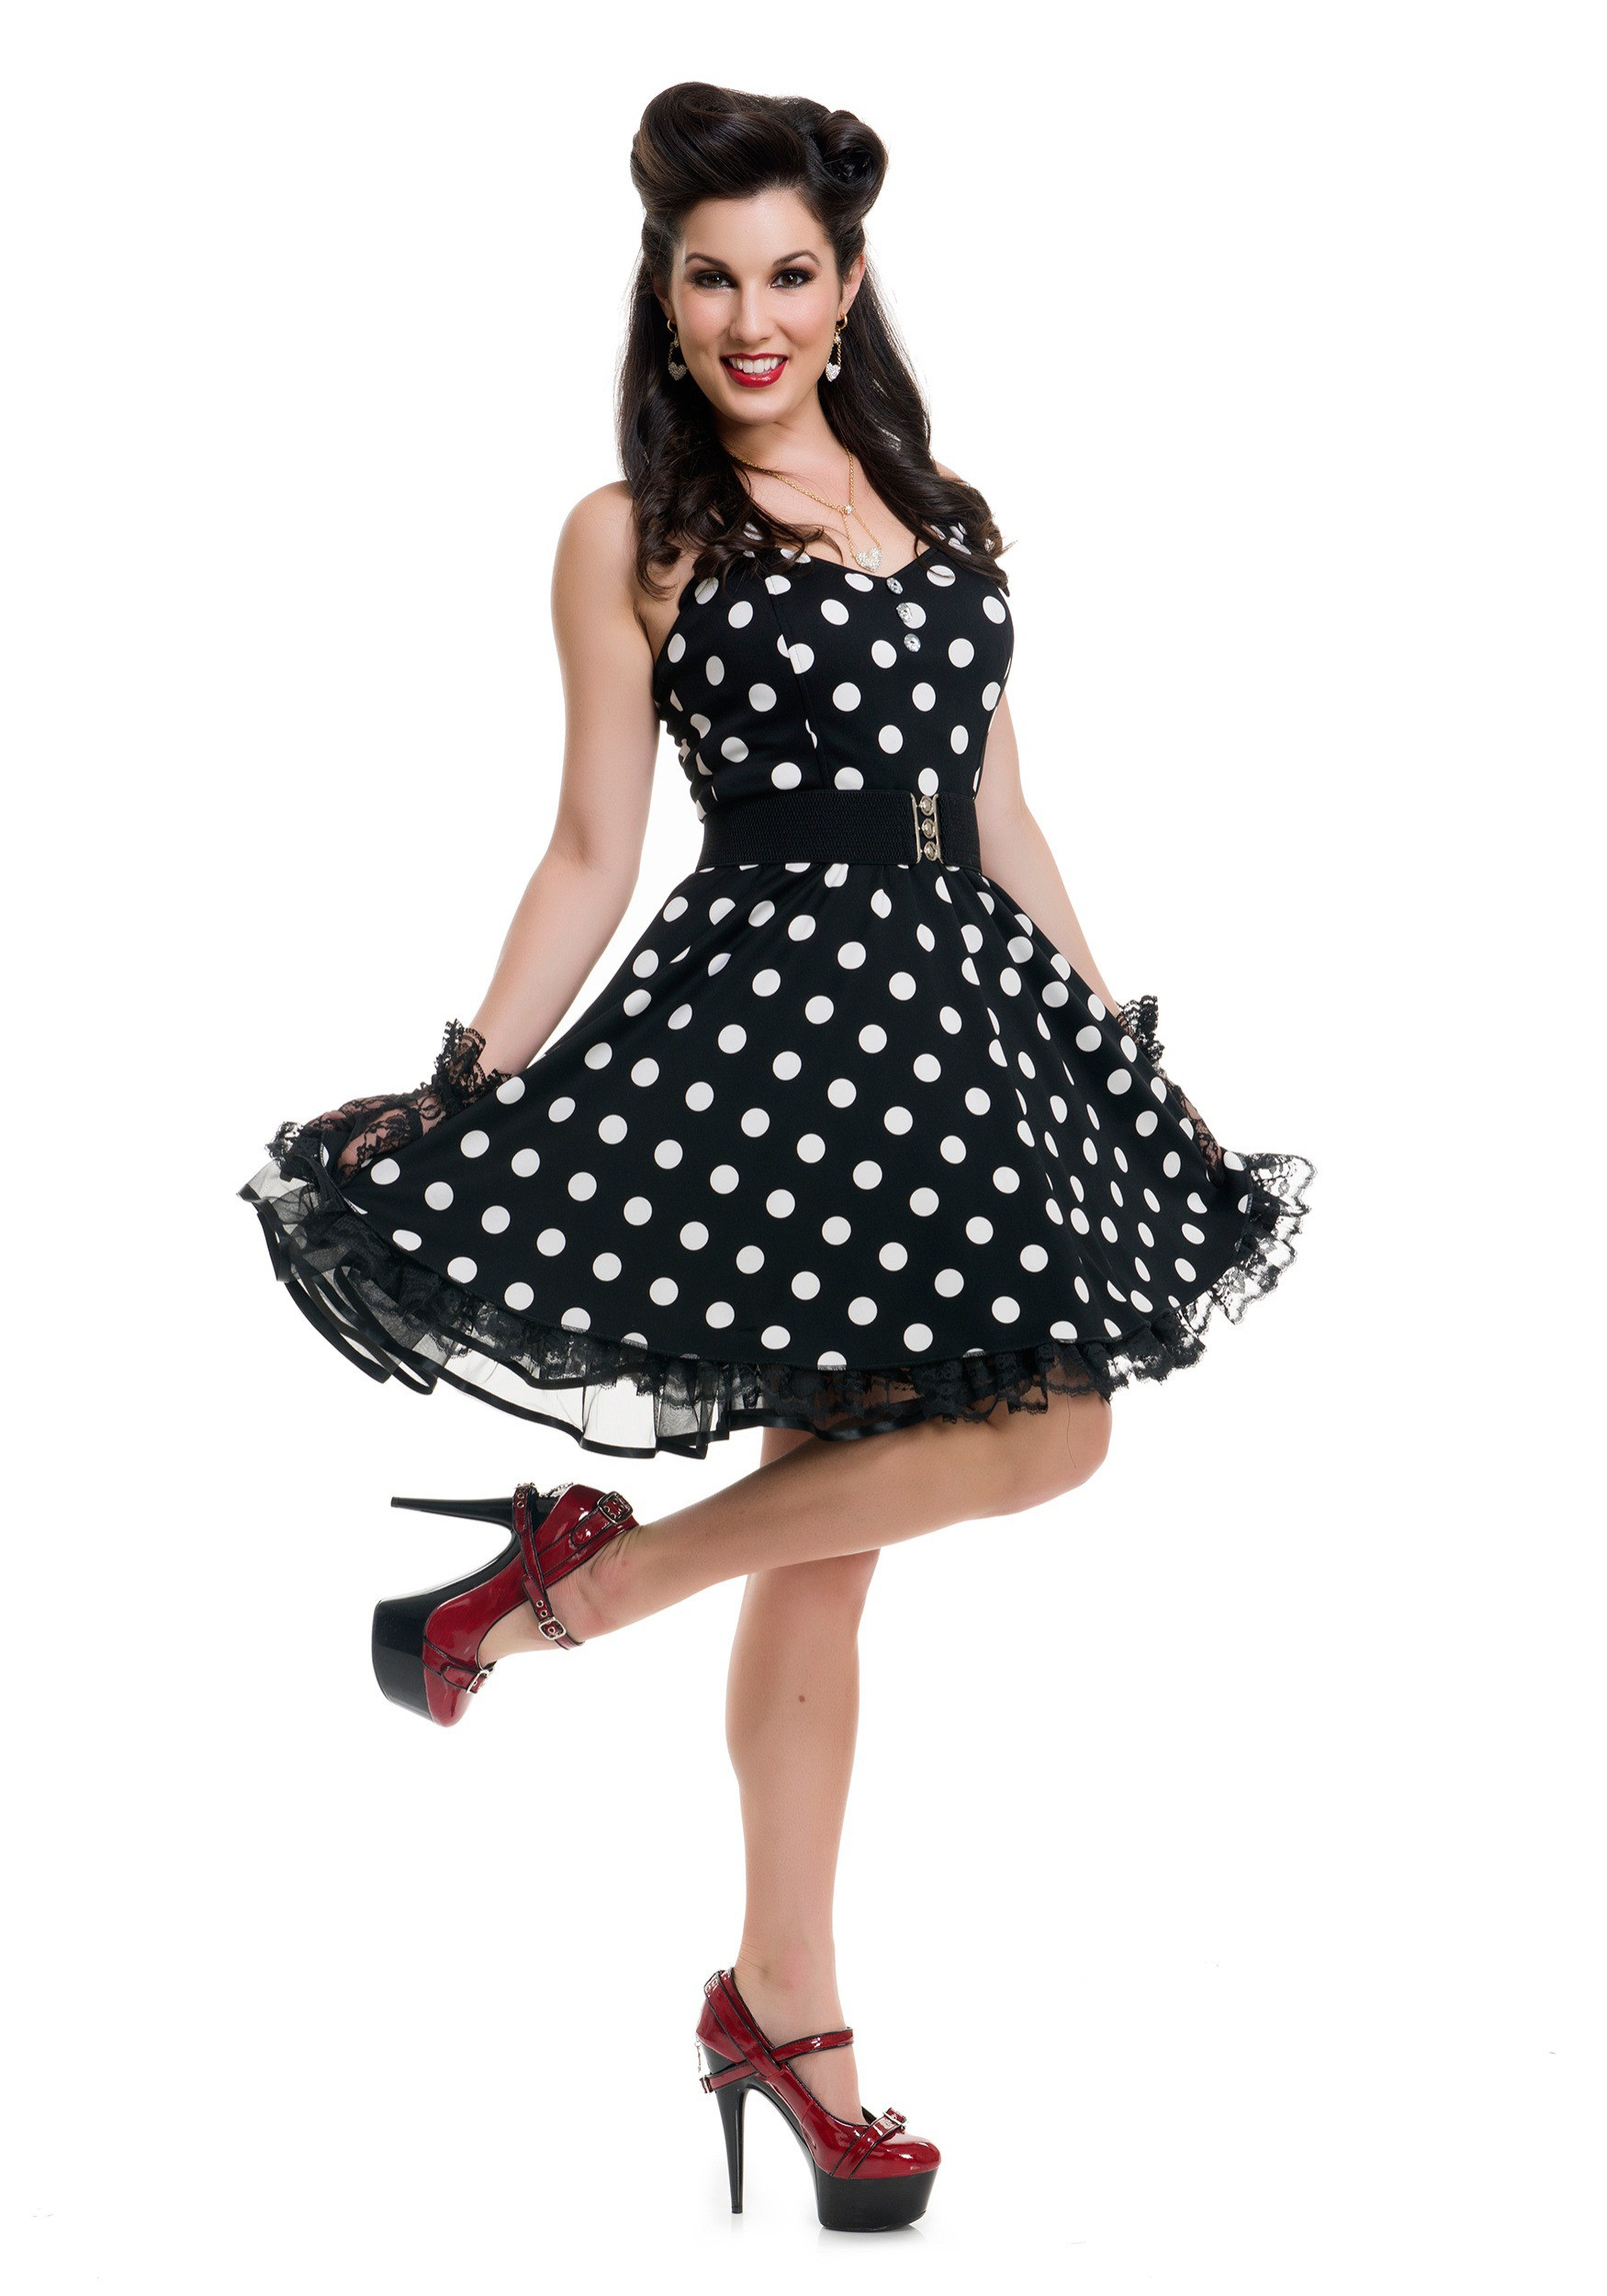 Pins Outfit
 Women s Black Polka Dot Pin Up Costume